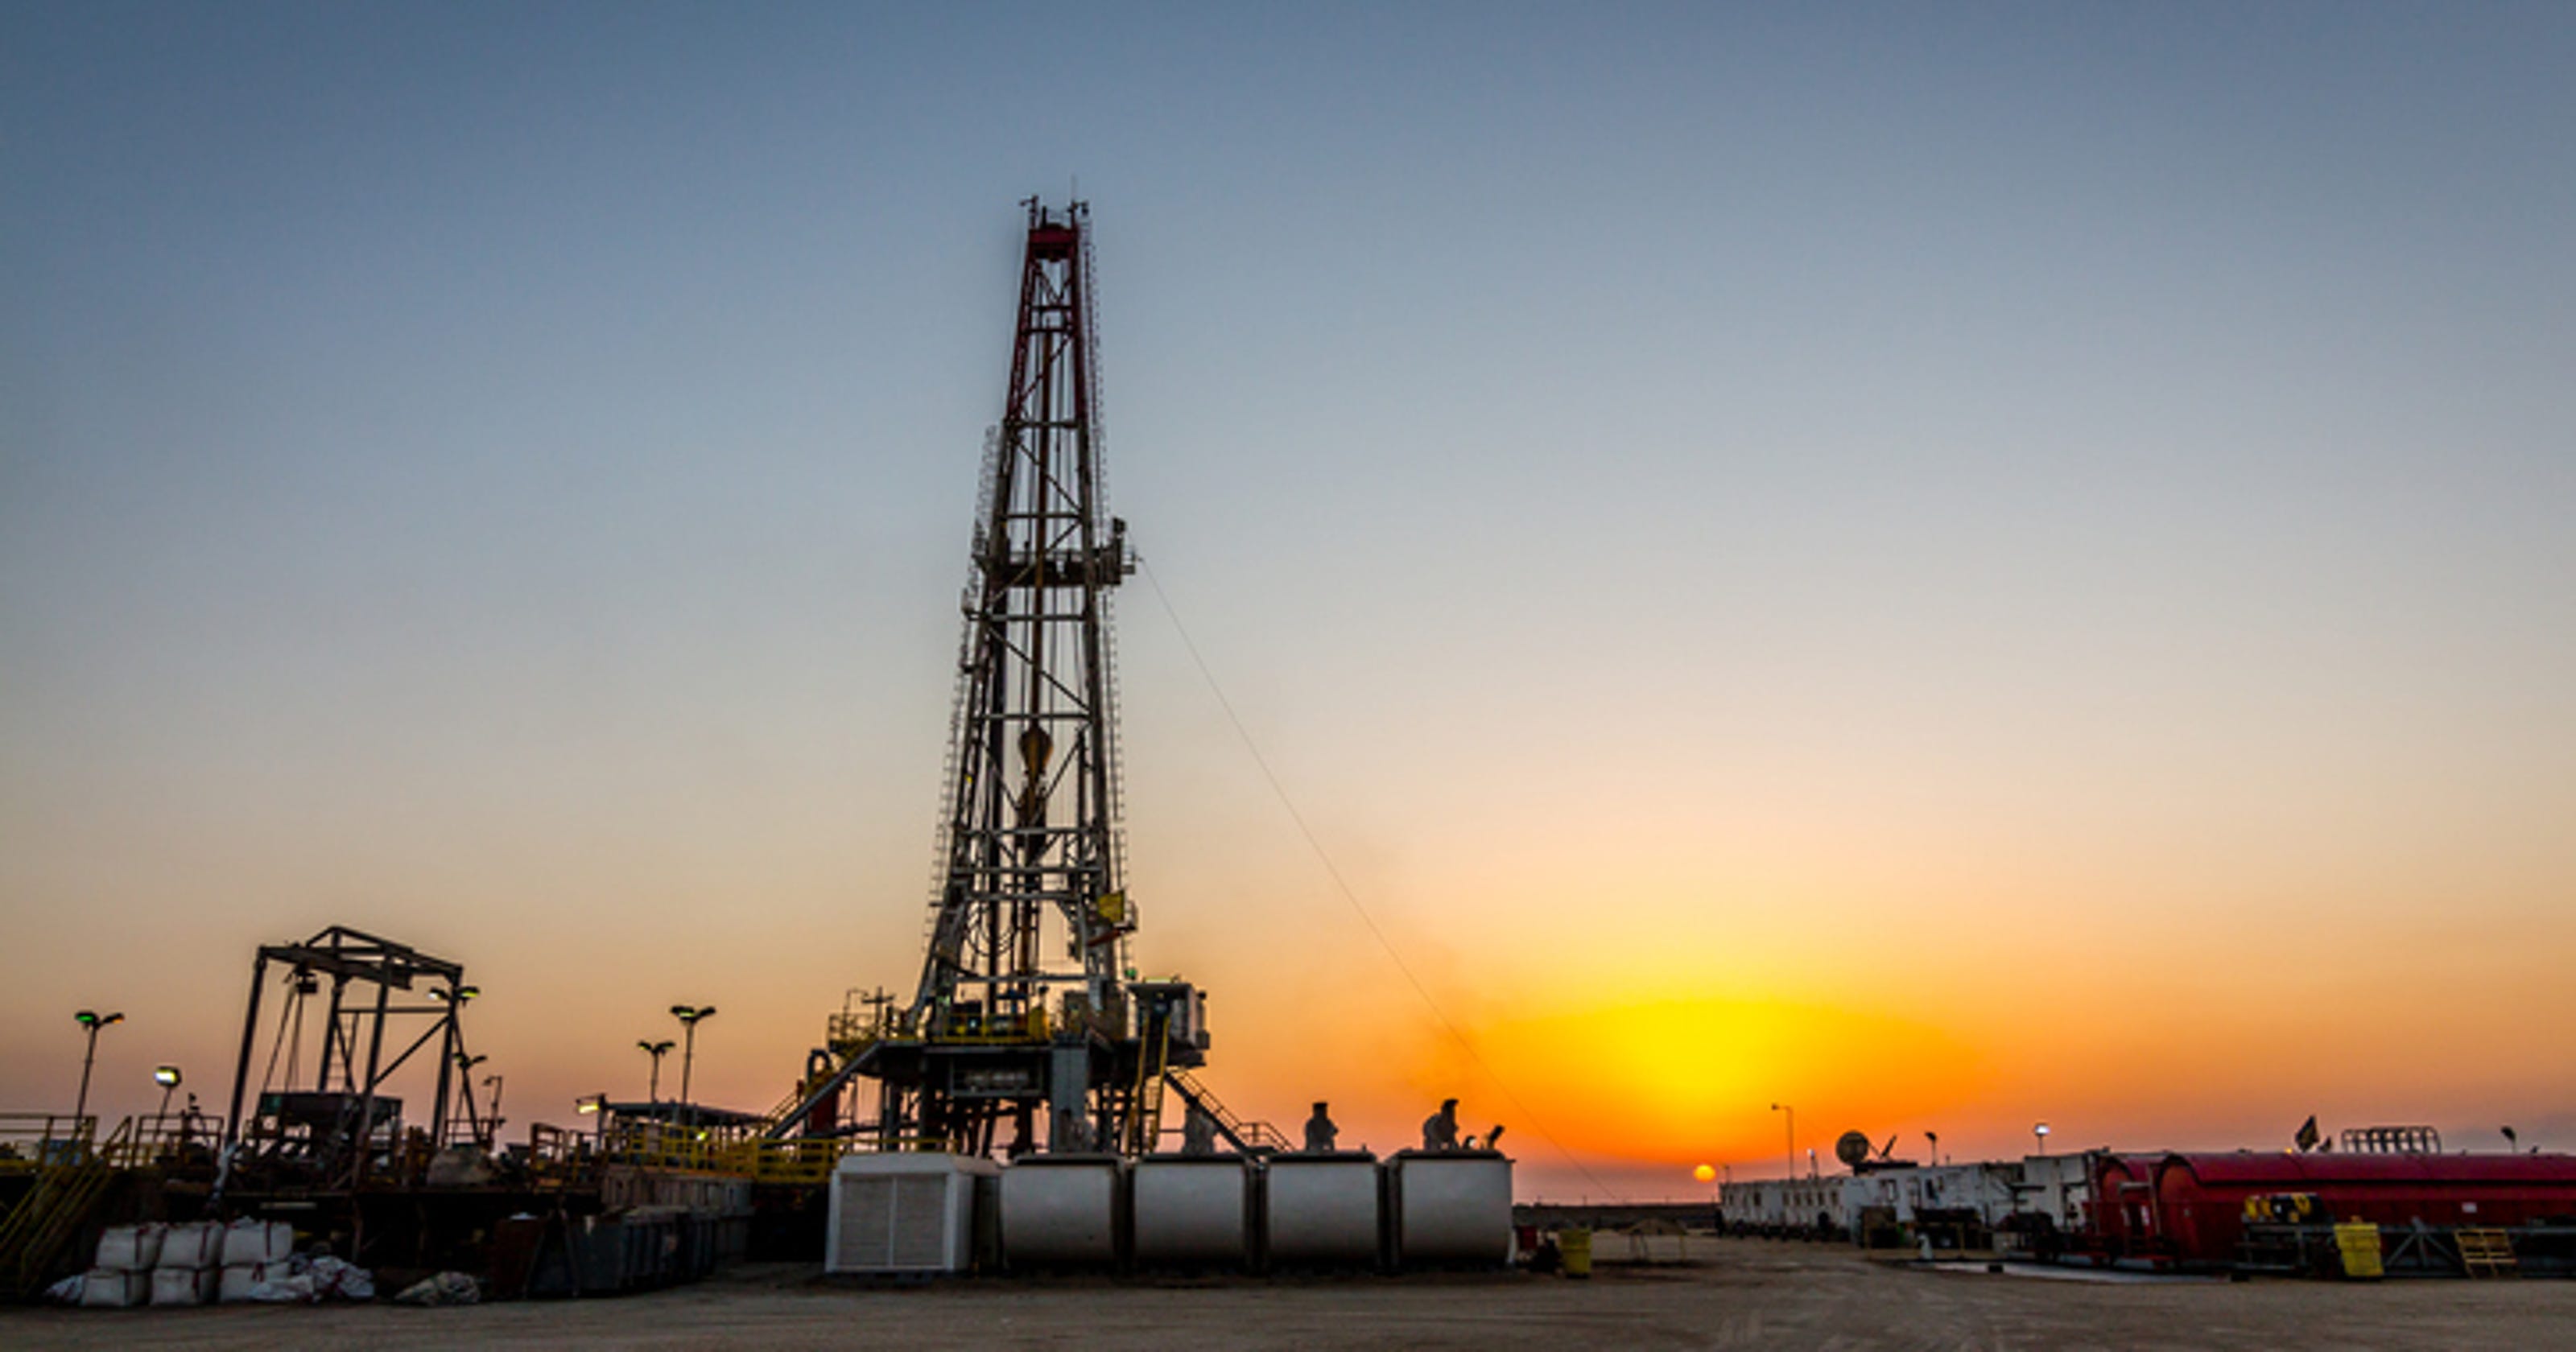 New Mexico works 'proactively' with oil and gas after earthquakes tied to fracking in West Texas - Carlsbad Current Argus